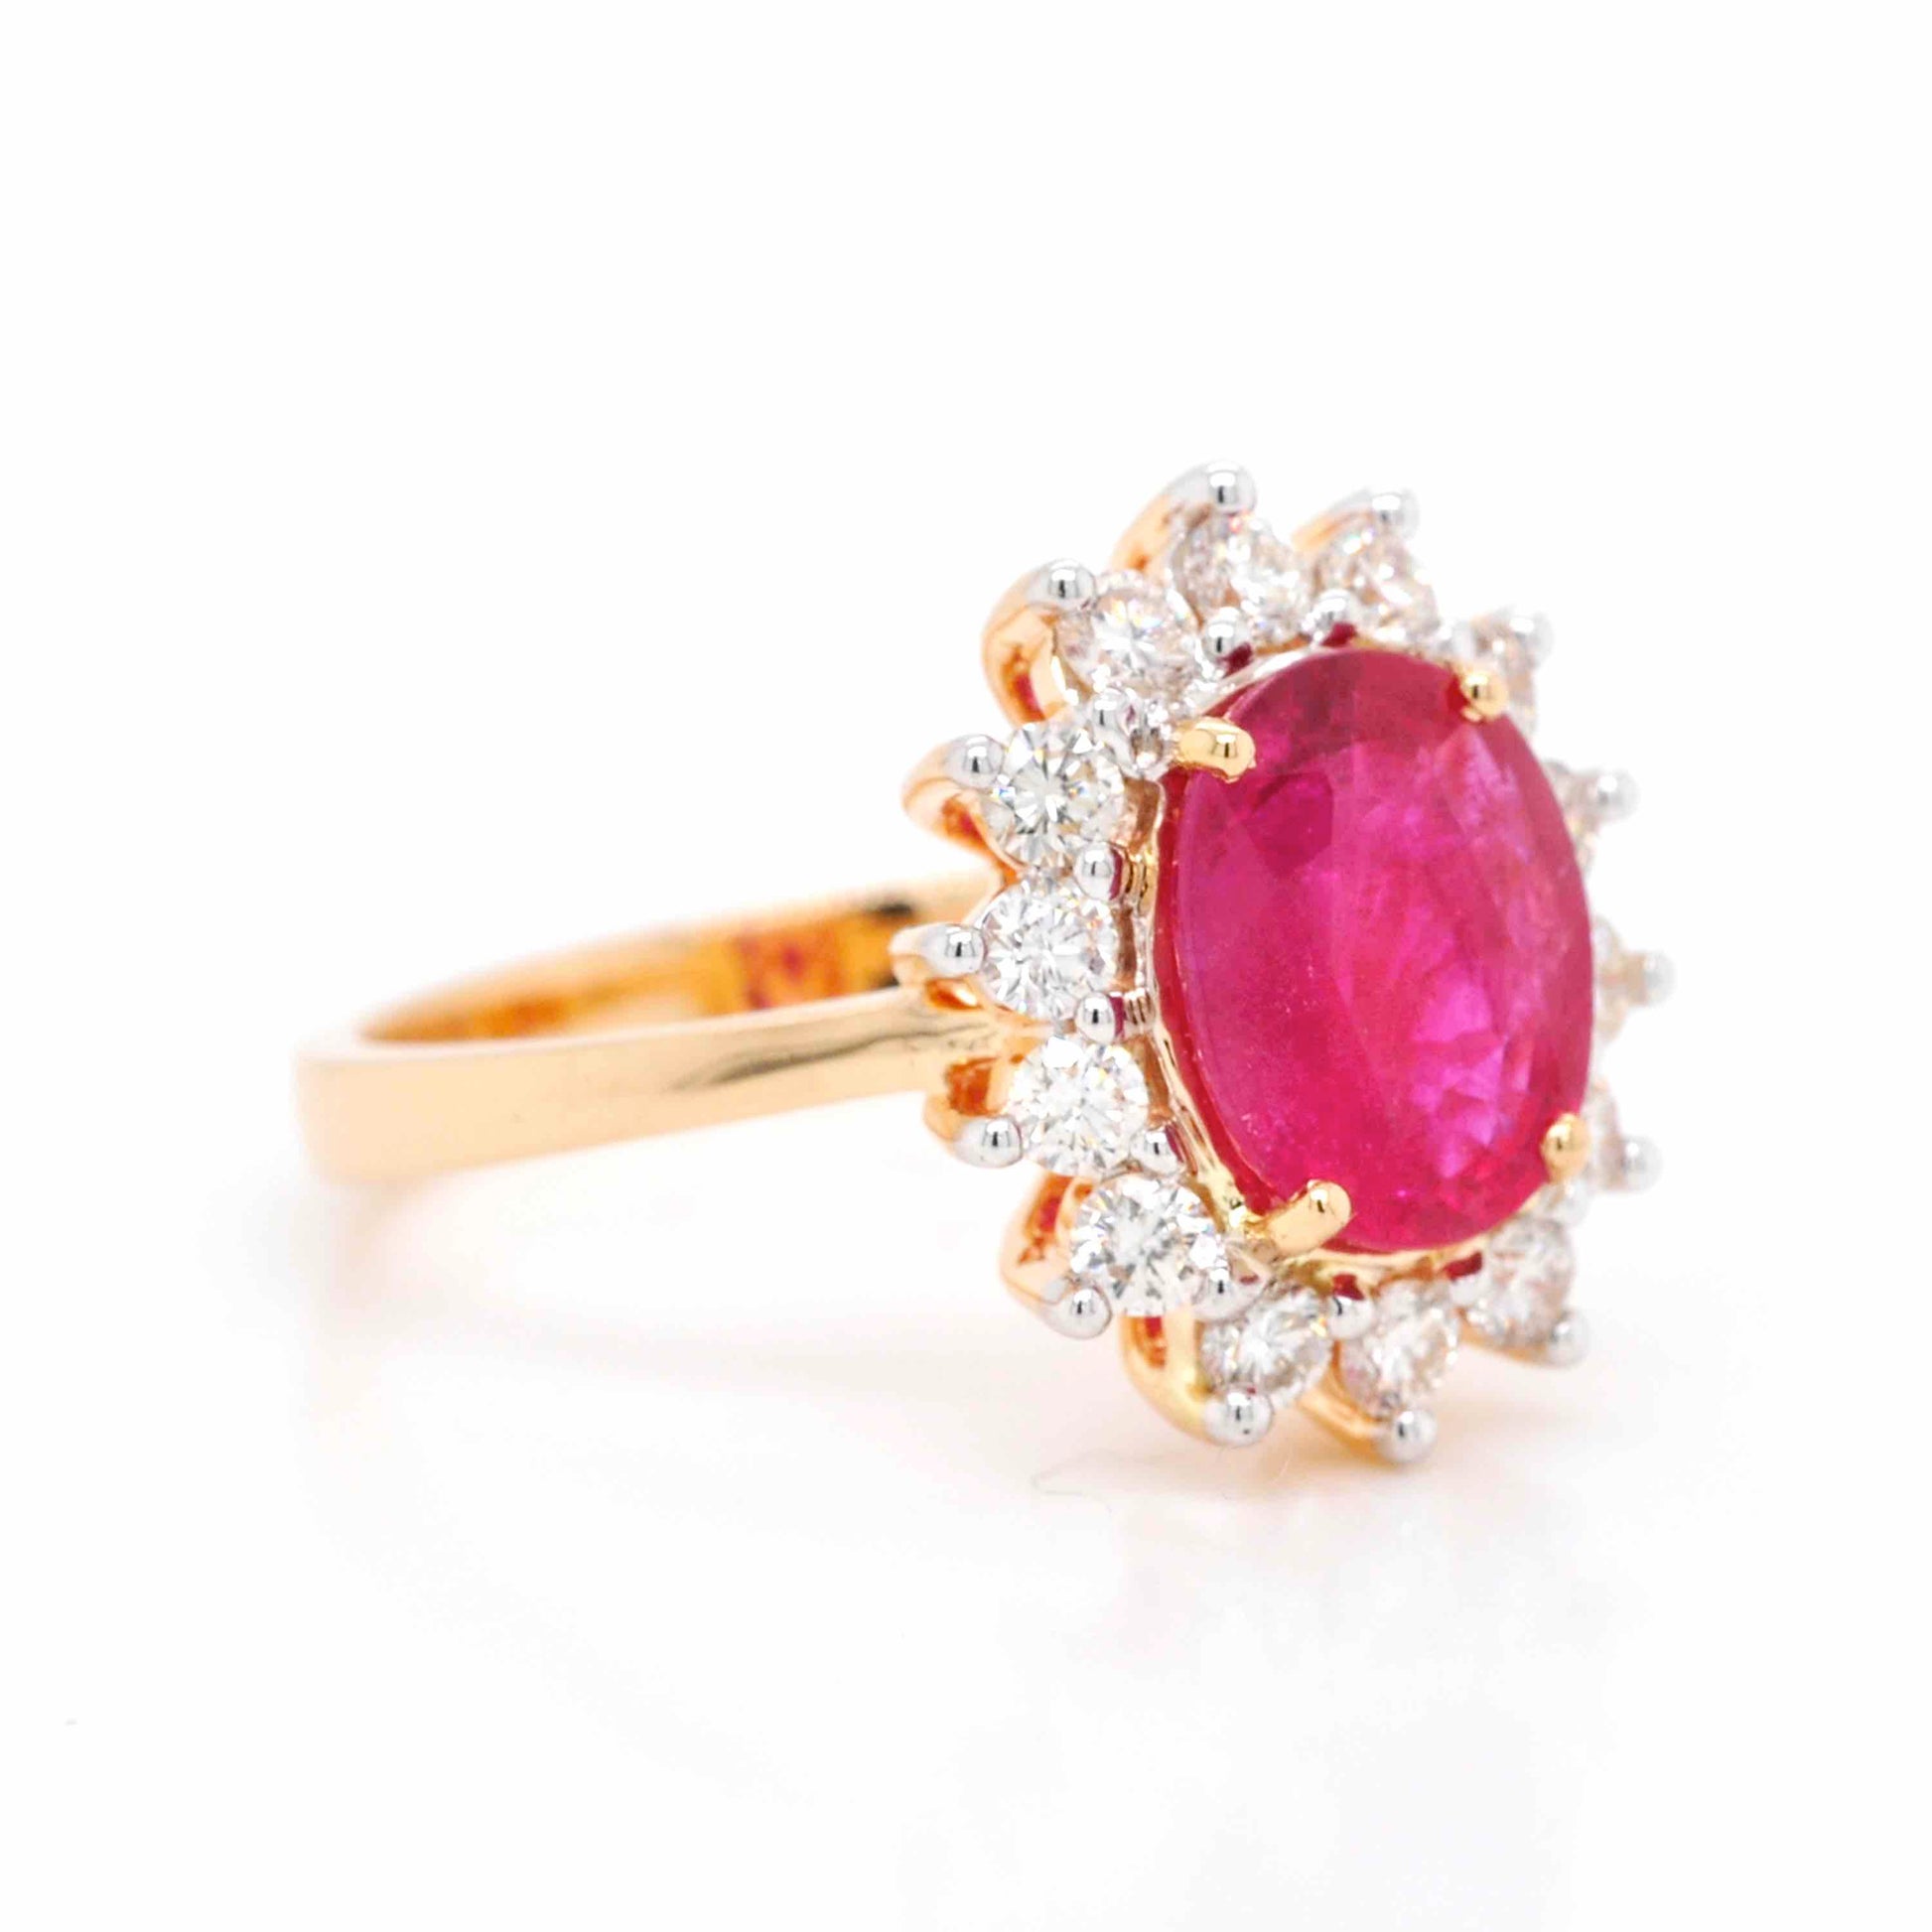 Lustrous Ruby Diamond Cluster Ring with an eye-catching cluster design